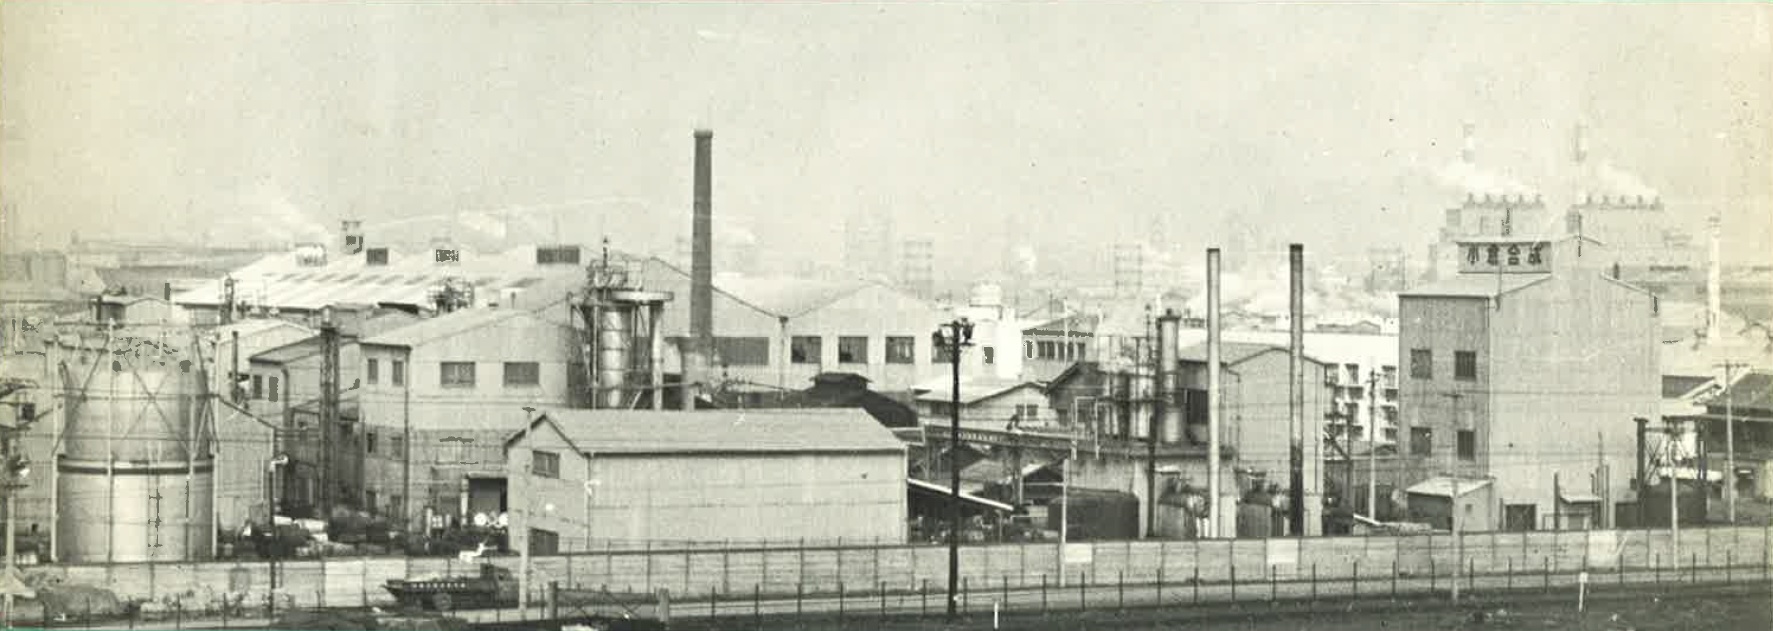 1960 Overview of production facilities